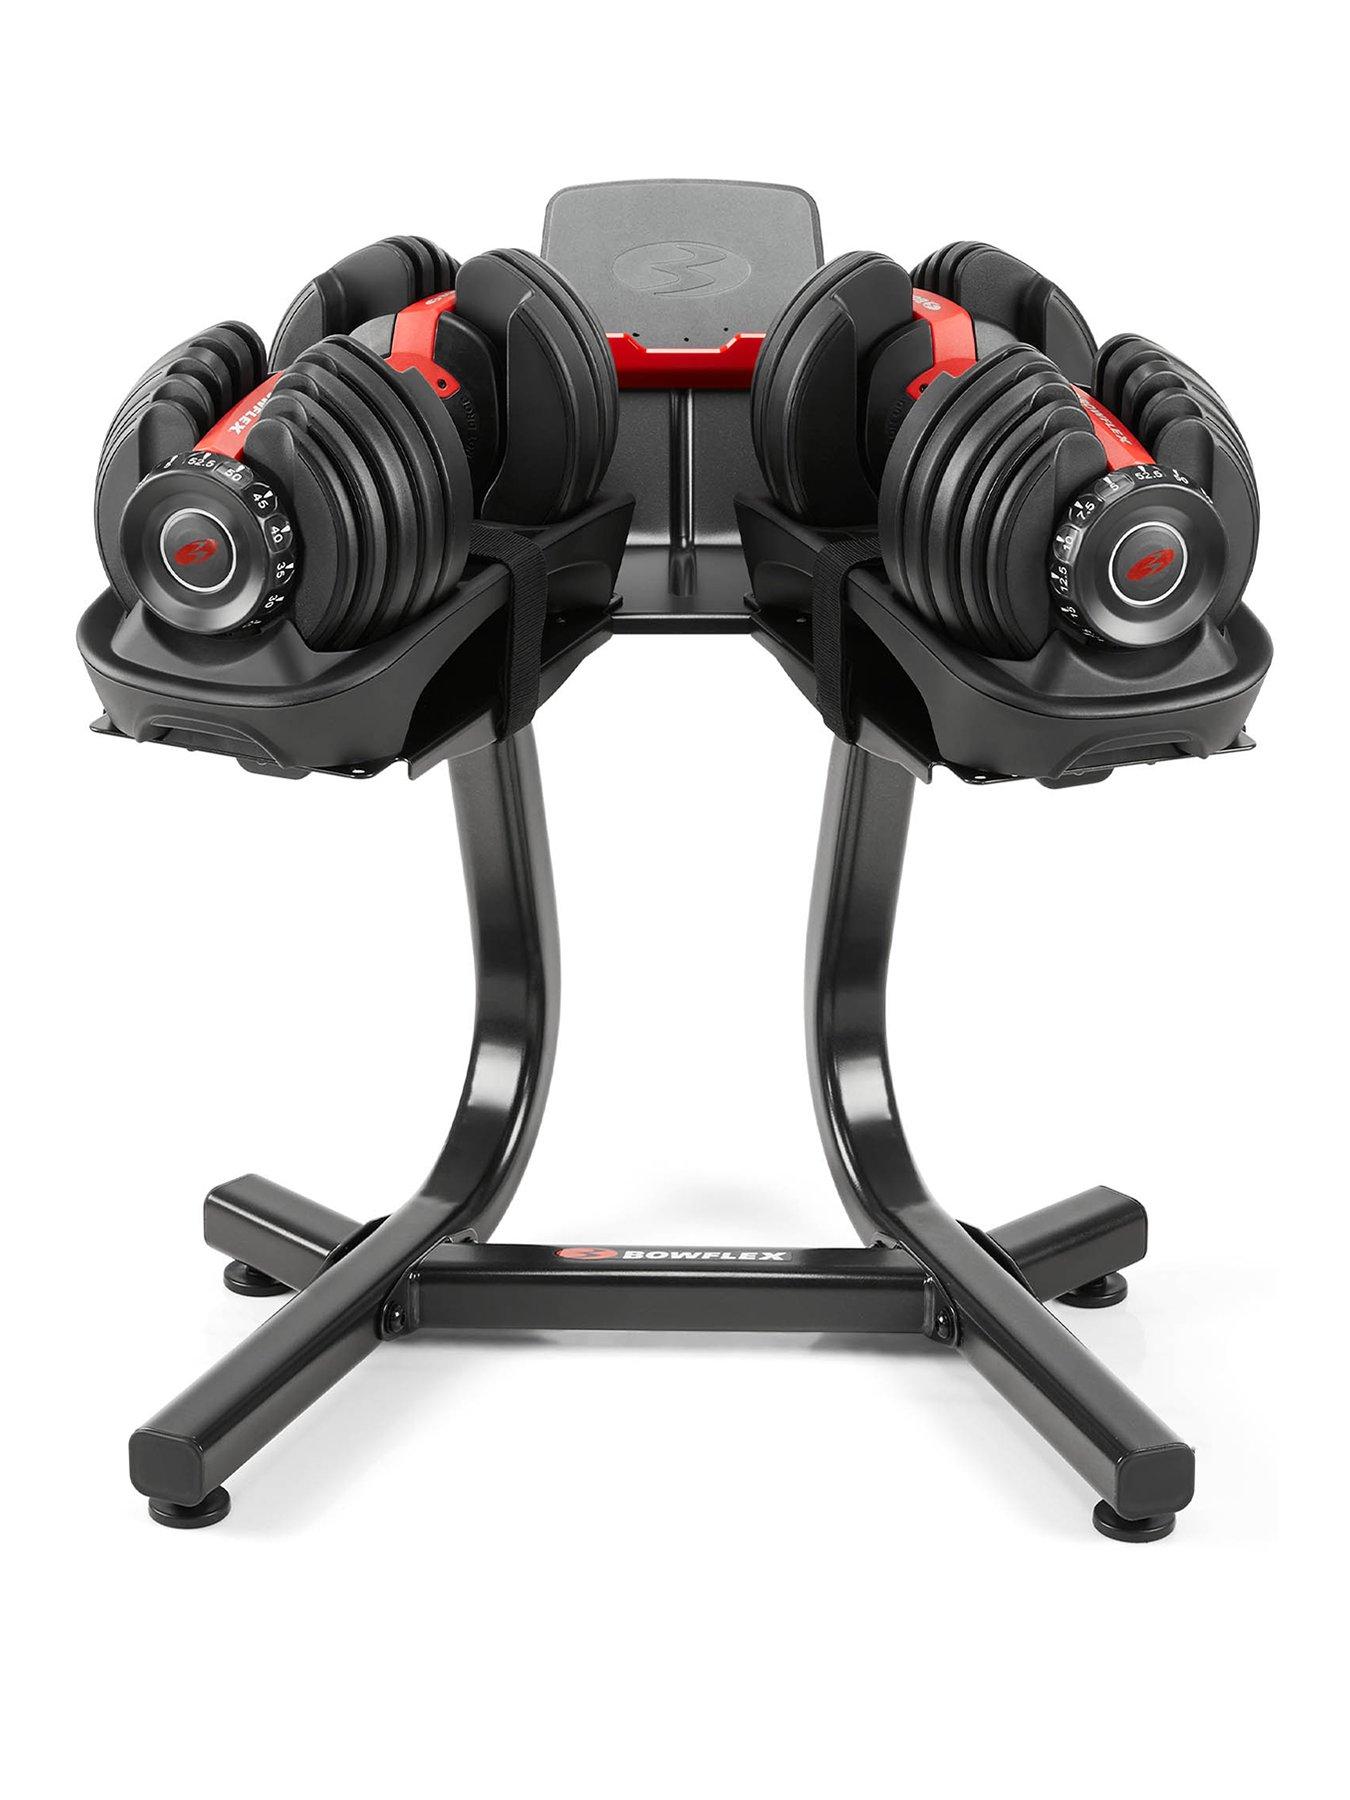 Bowflex Selecttech 552I Adjustable Dumbbell Set With Stand